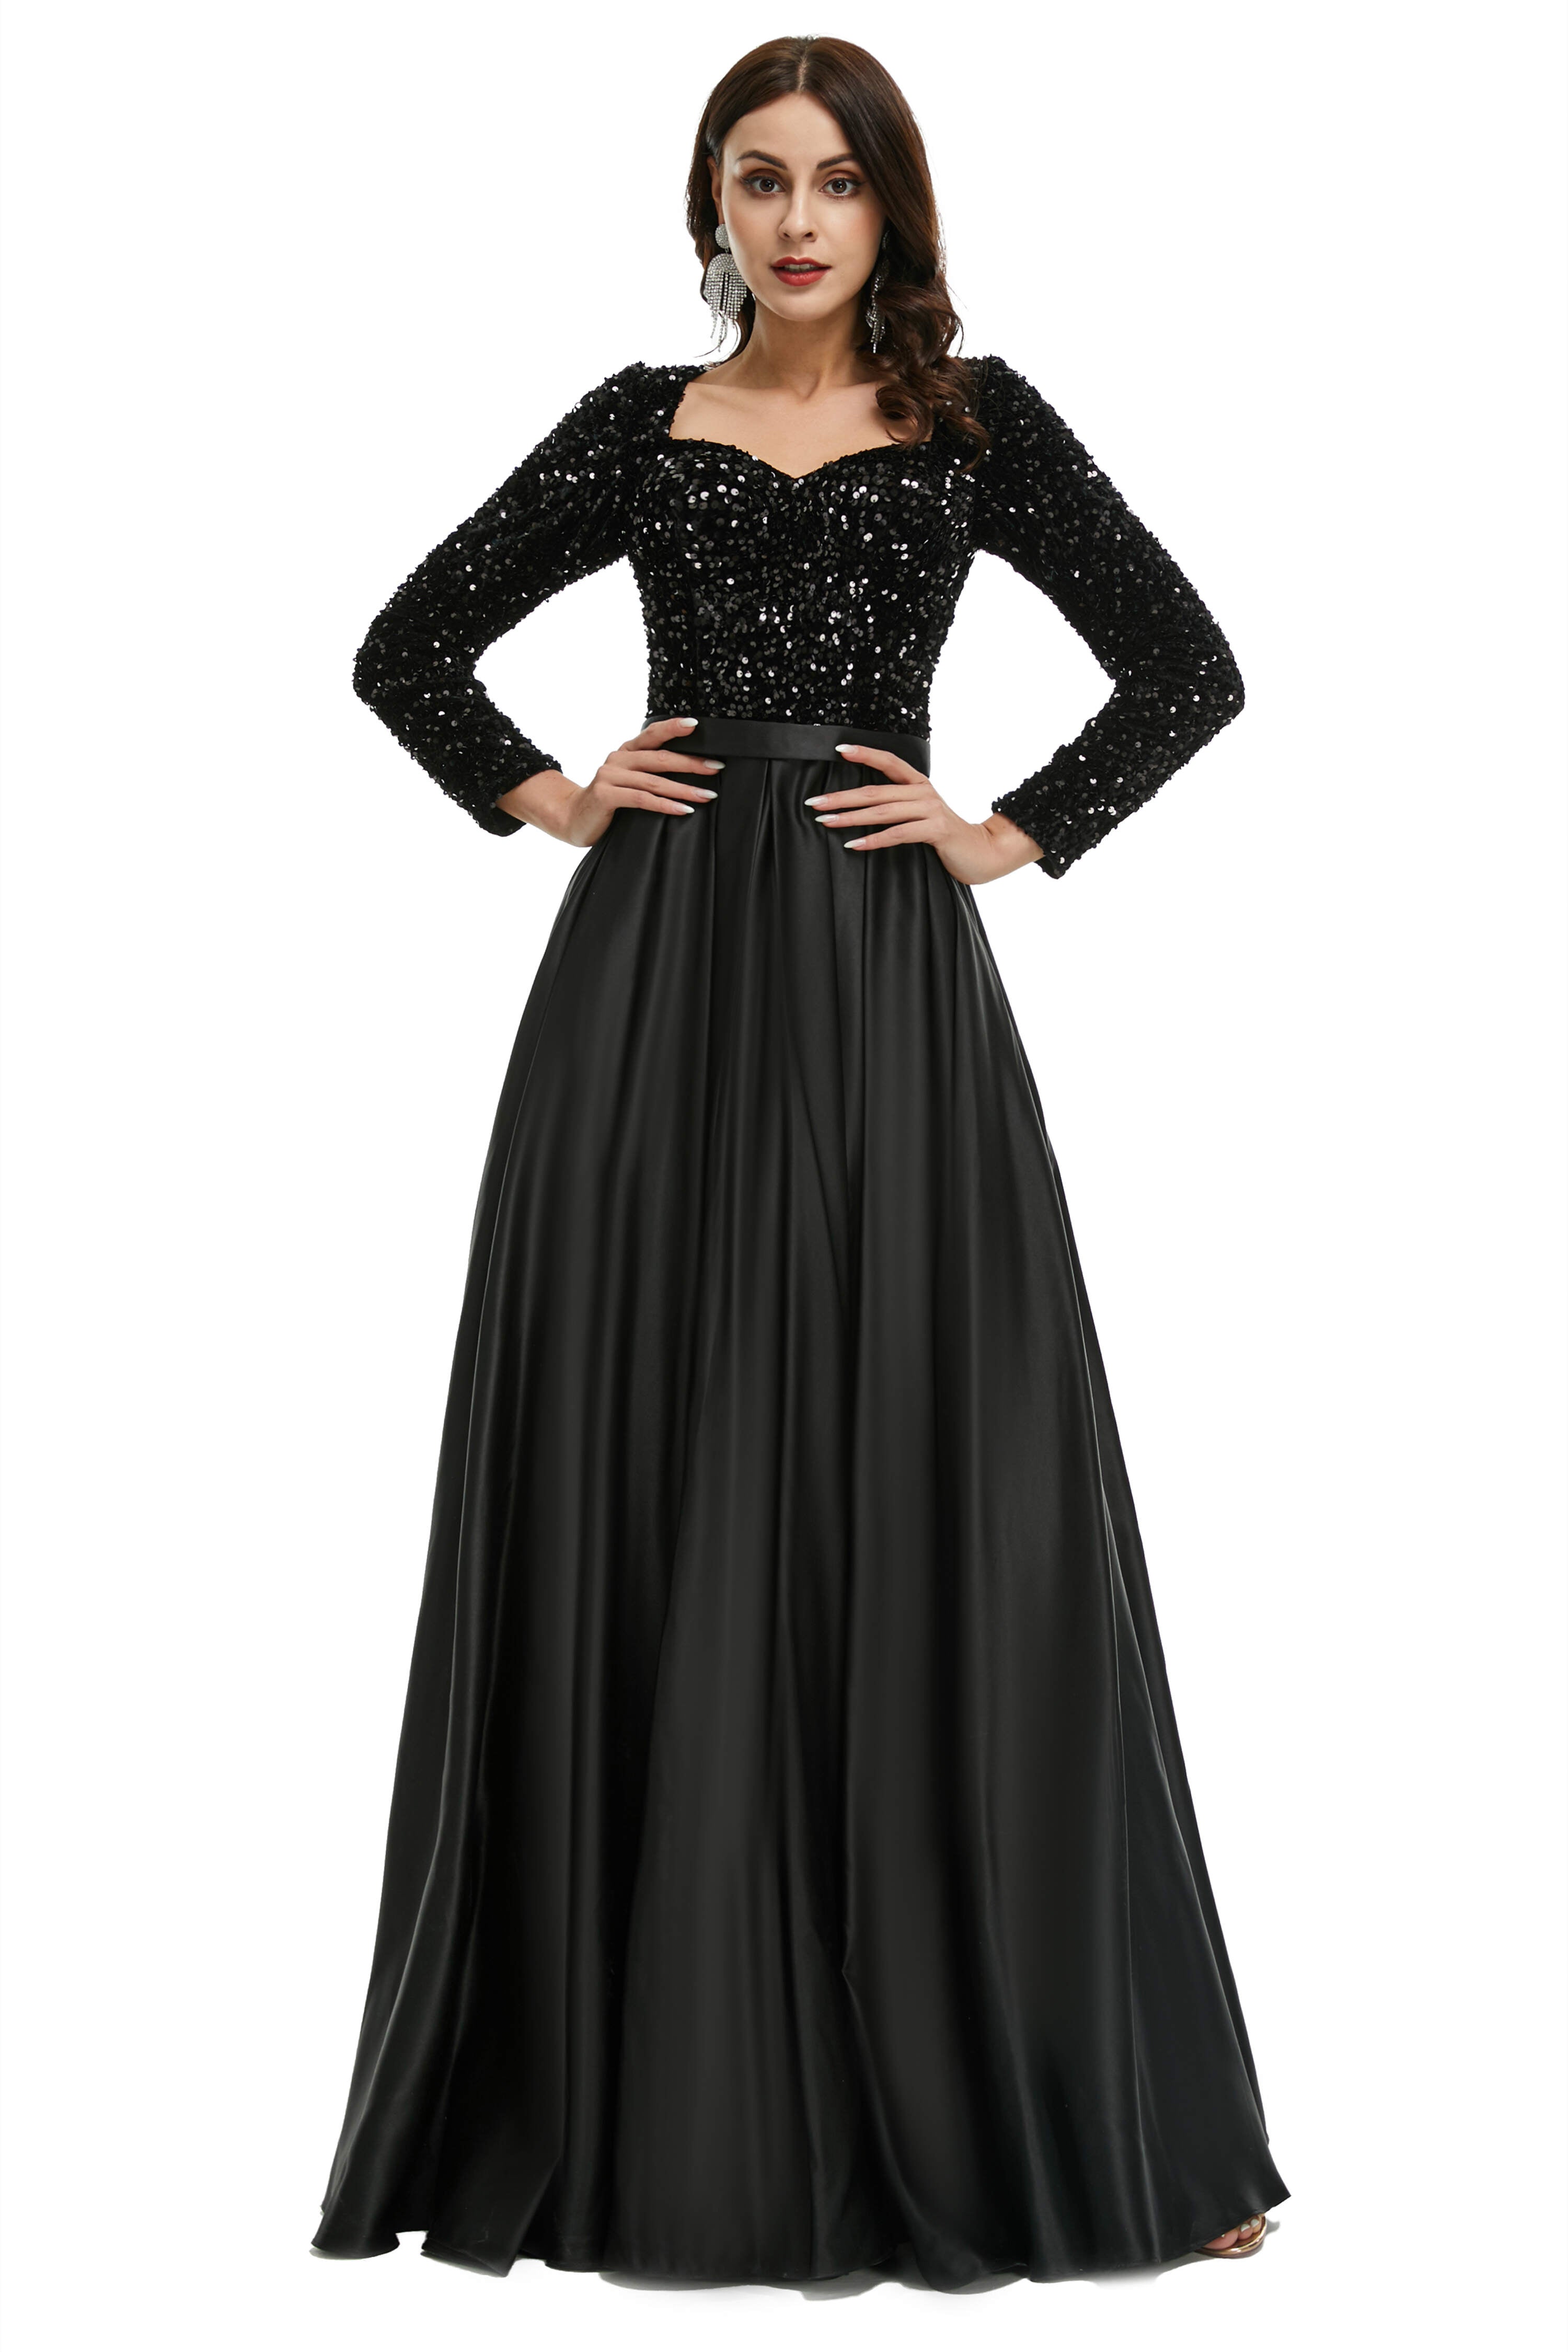 A-Line Sequins Sweet Neck Long Sleeve Corset Prom Dresses outfit, Prom Dress Uk